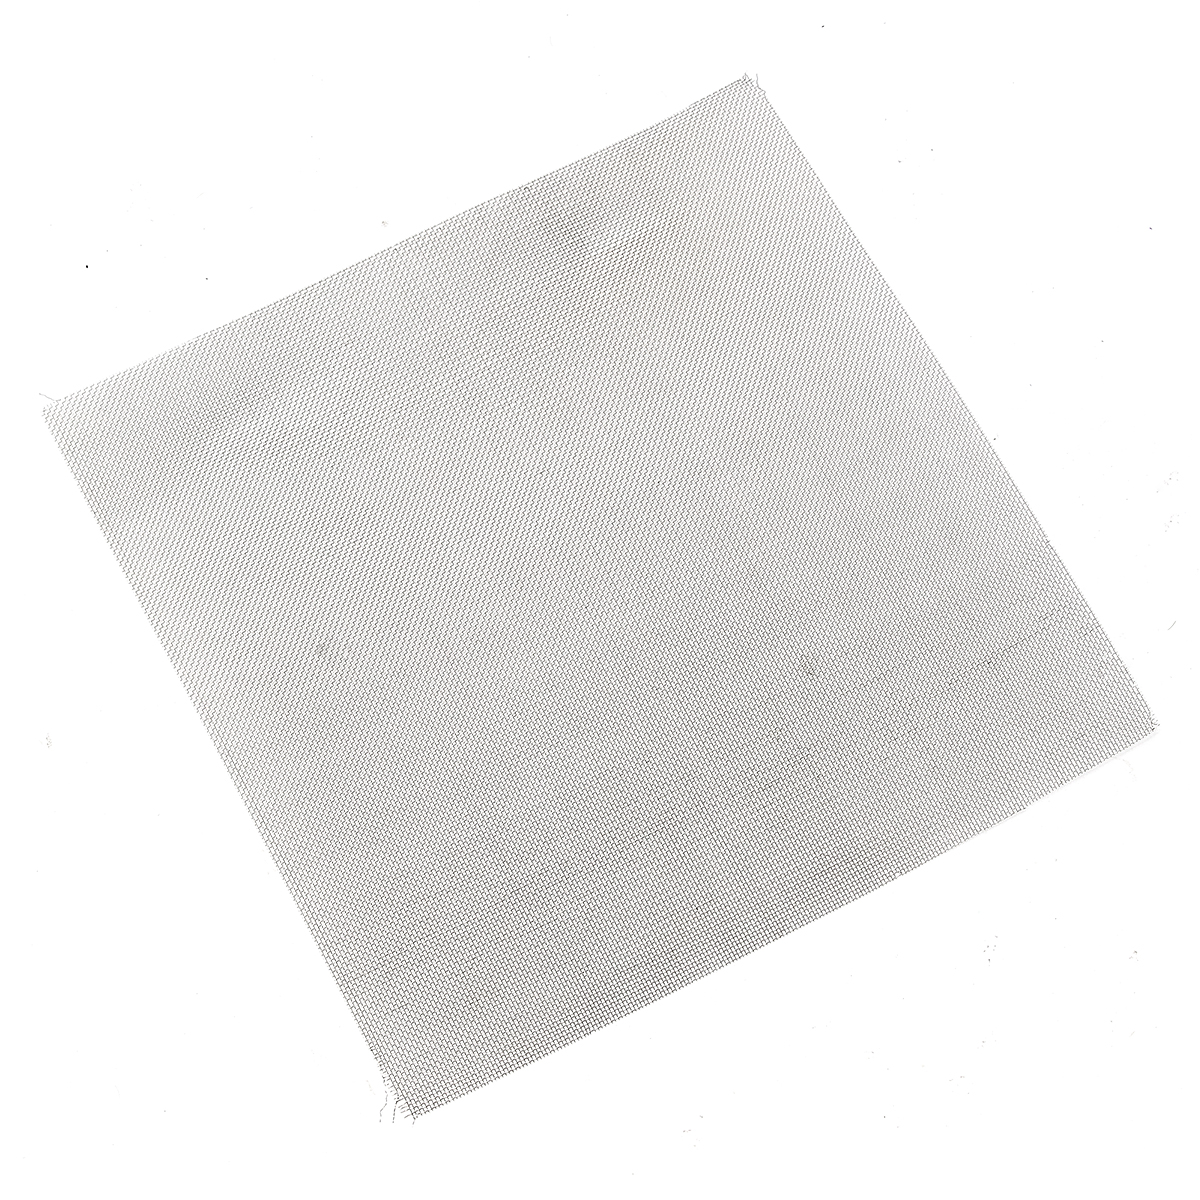 

30x30cm Woven Wire 304 Stainless Steel Filtration Grill Sheet Filter 20 Mesh